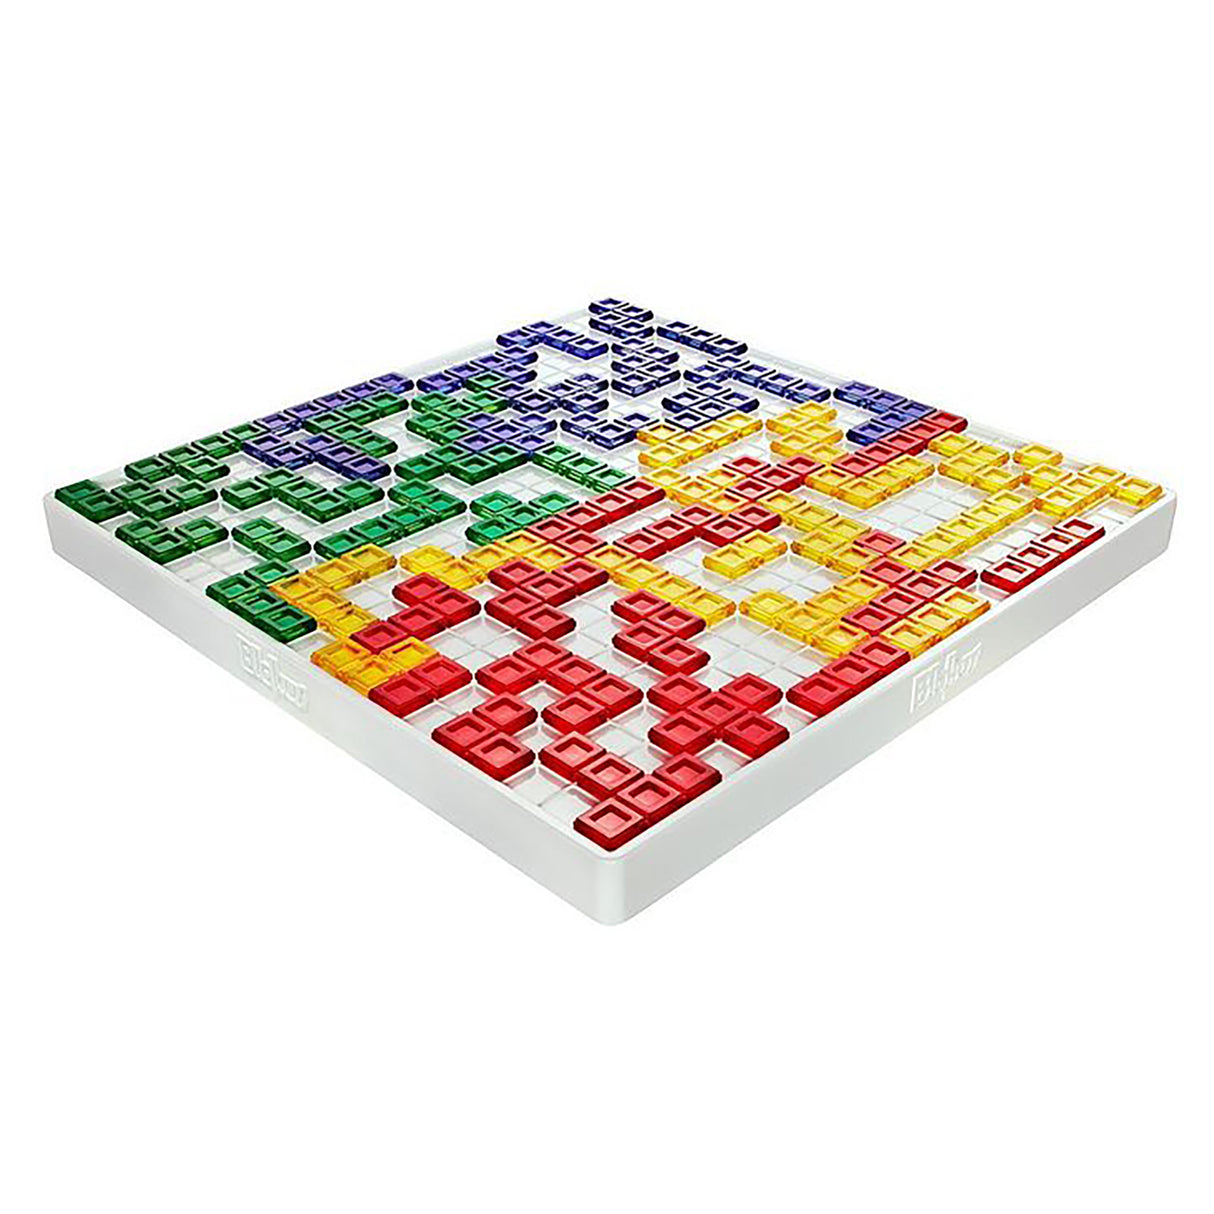 Blokus Competitive Building Game